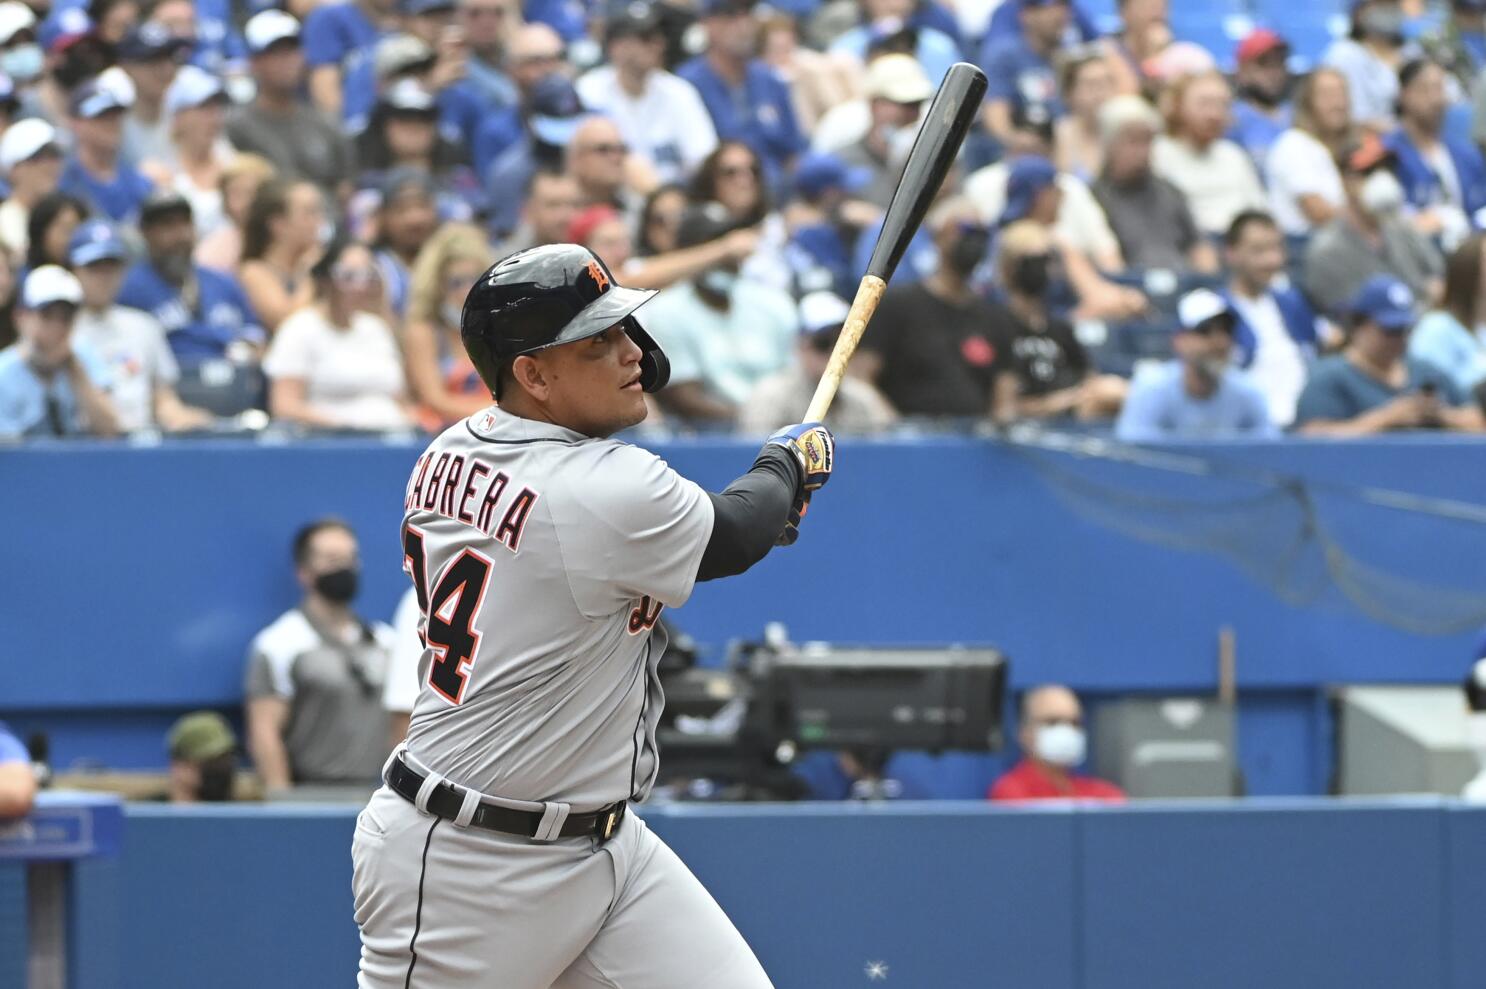 PHOTO: Miguel Cabrera Receives Standing Ovation After Winning